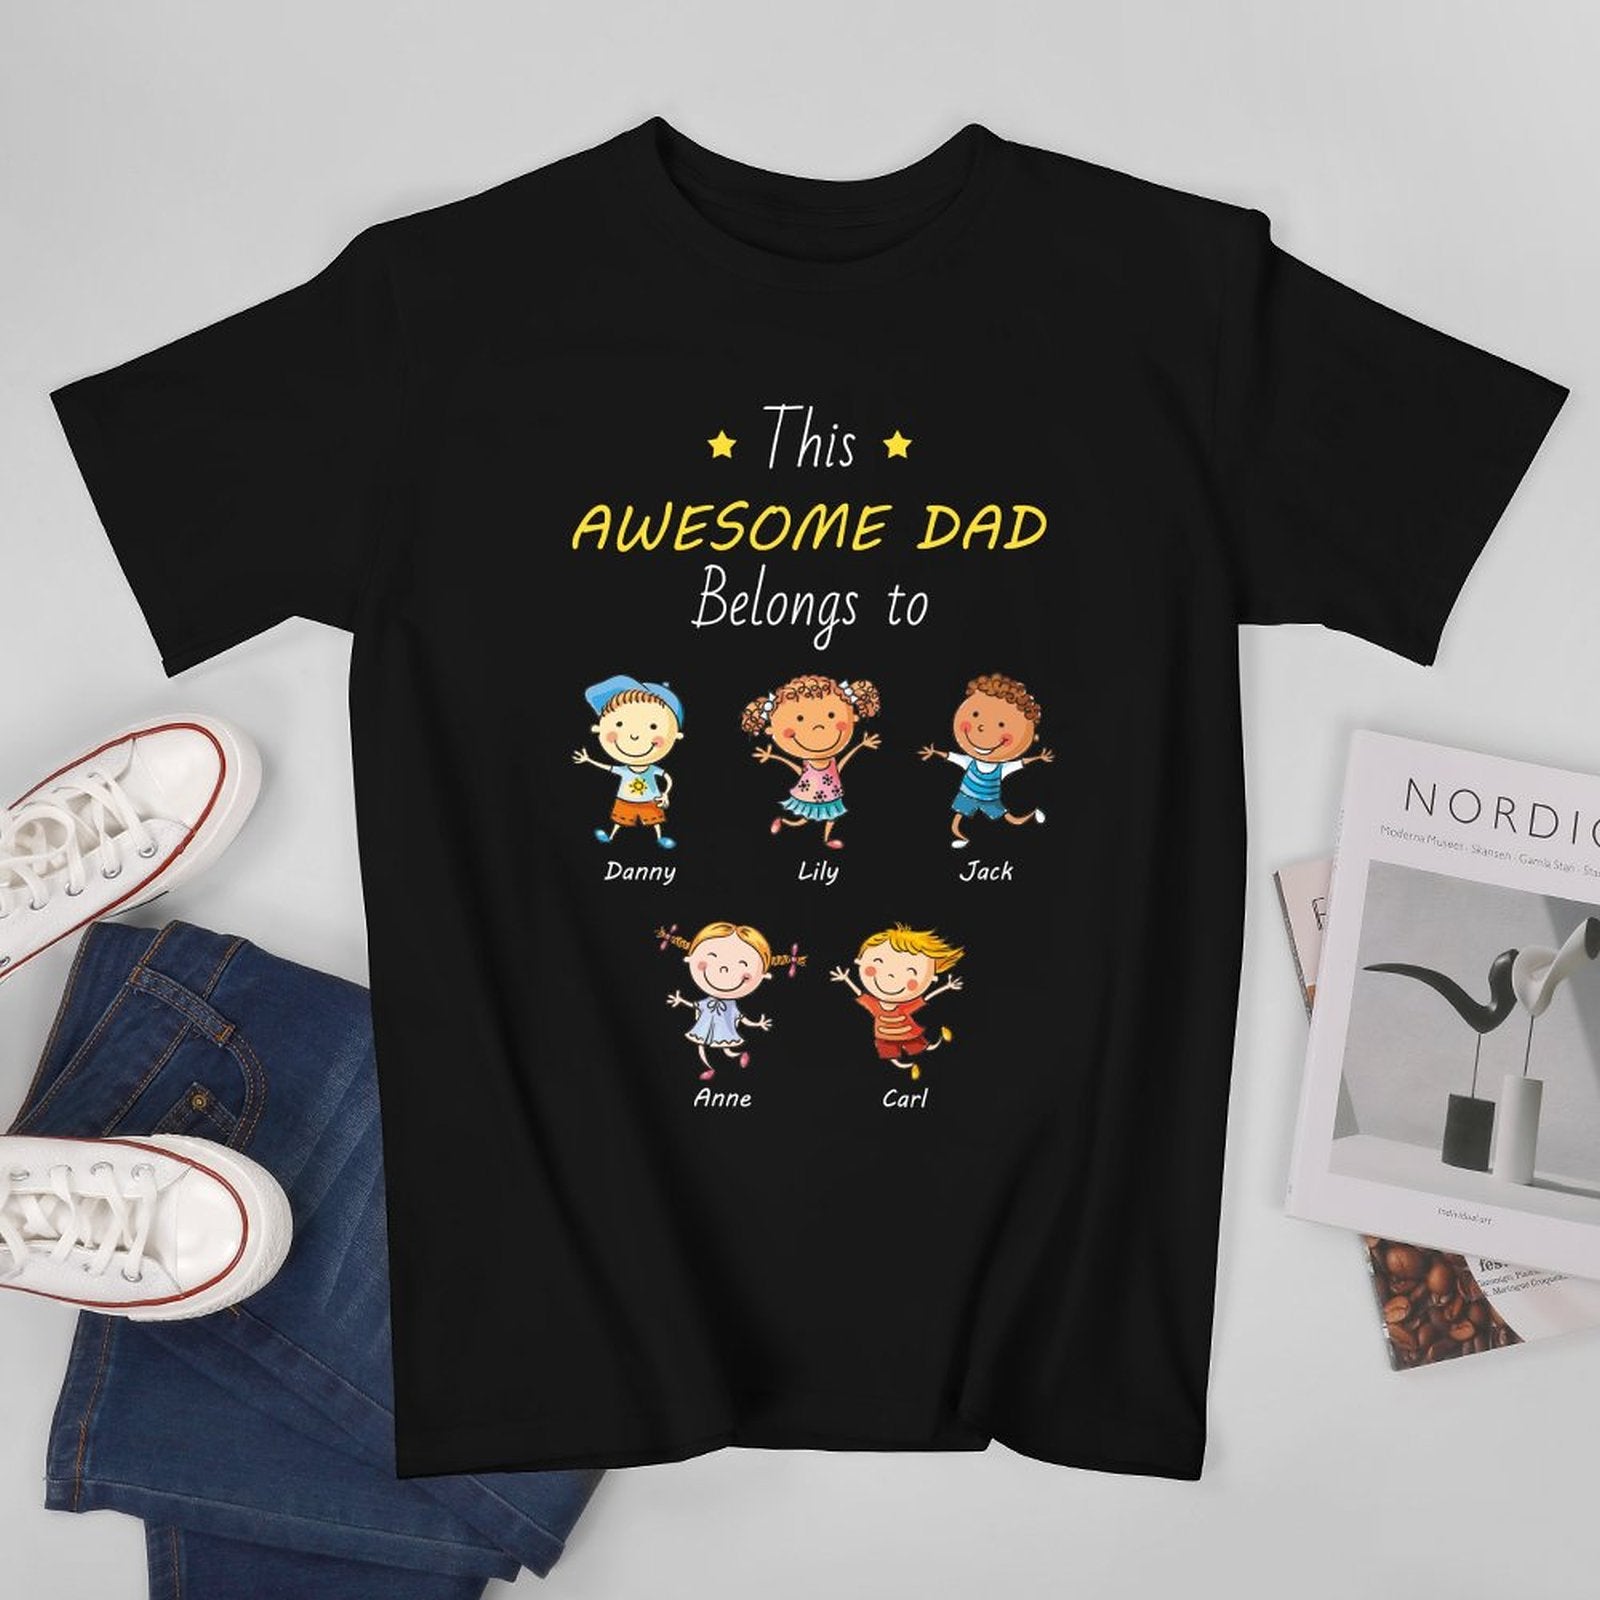 This Dad Belongs to Us, Personalized Custom T-Shirt For Men - Gift For Dad, Father's Day Gift - colorfulcustom